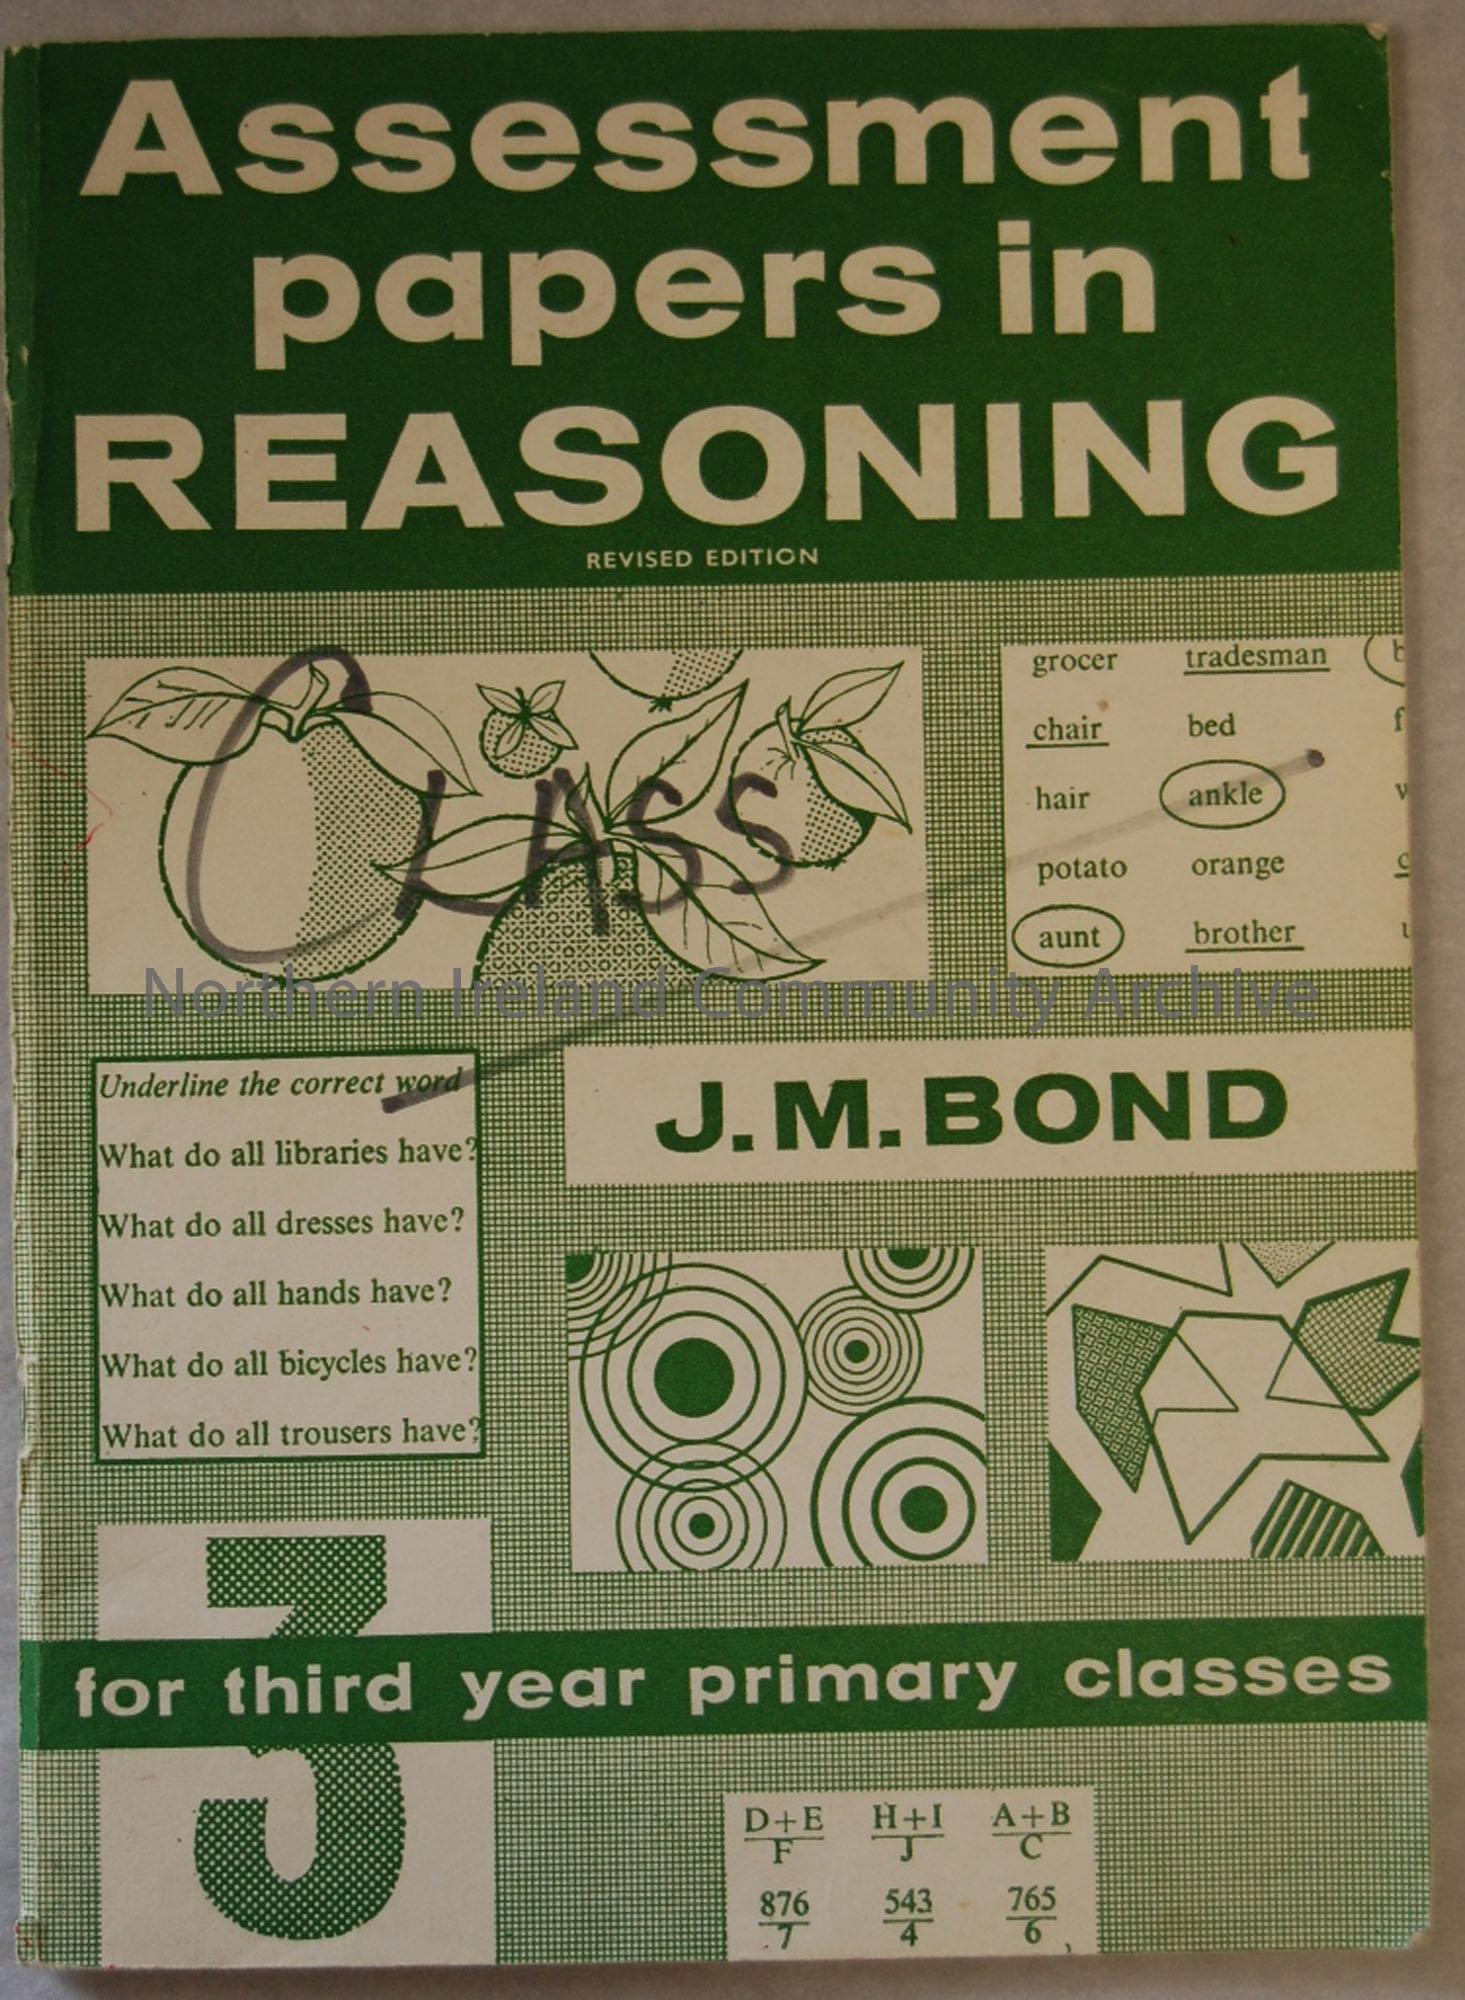 ‘Assessment papers in Reasoning’ J.M Bond. Class edition. For third year primary classes. Contains different blank exercises which have been filled in…